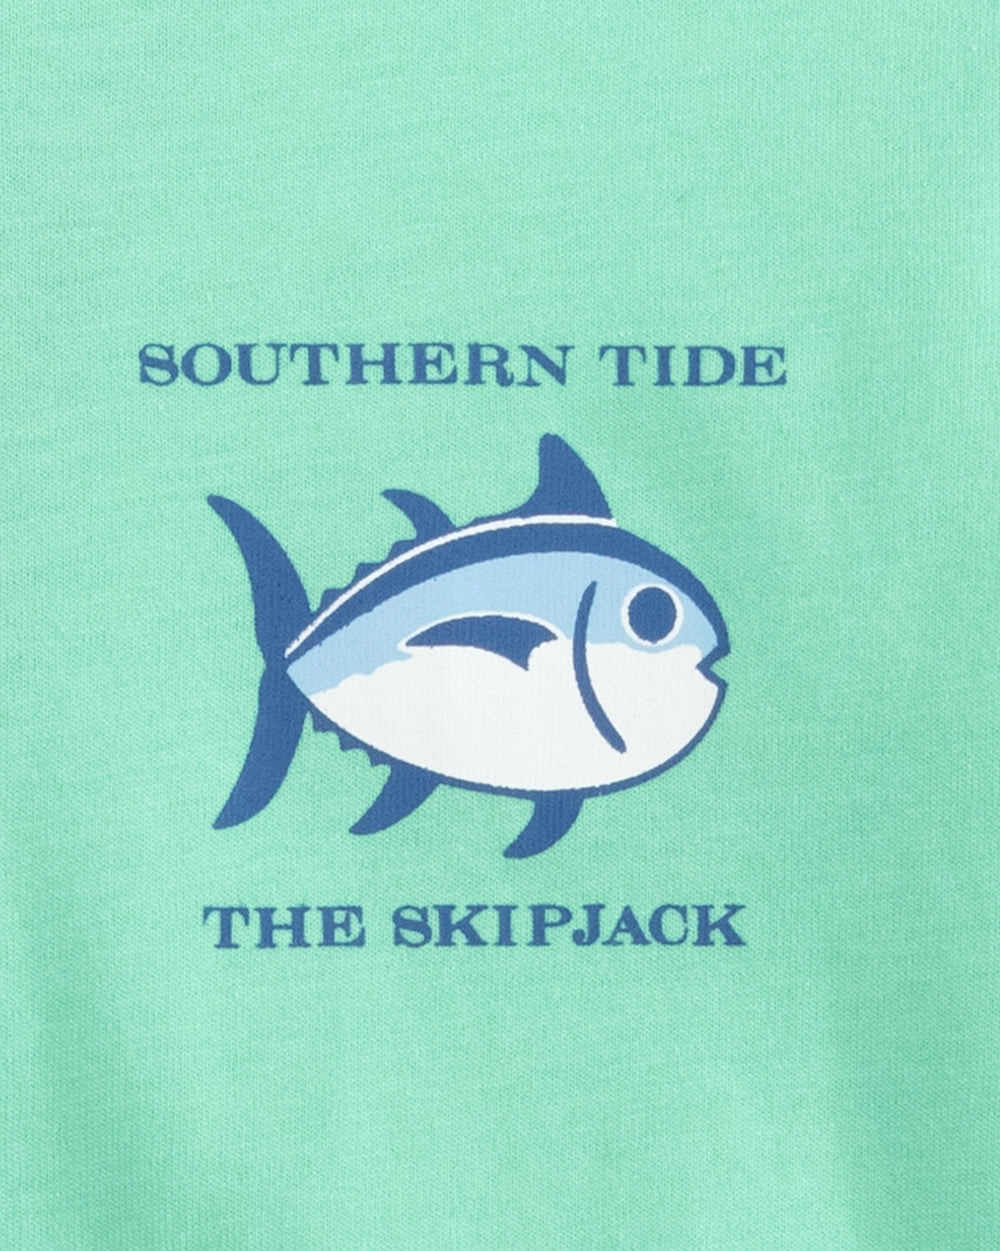 The pocket view of the Kids Original Skipjack T-shirt by Southern Tide - Isle of Pines